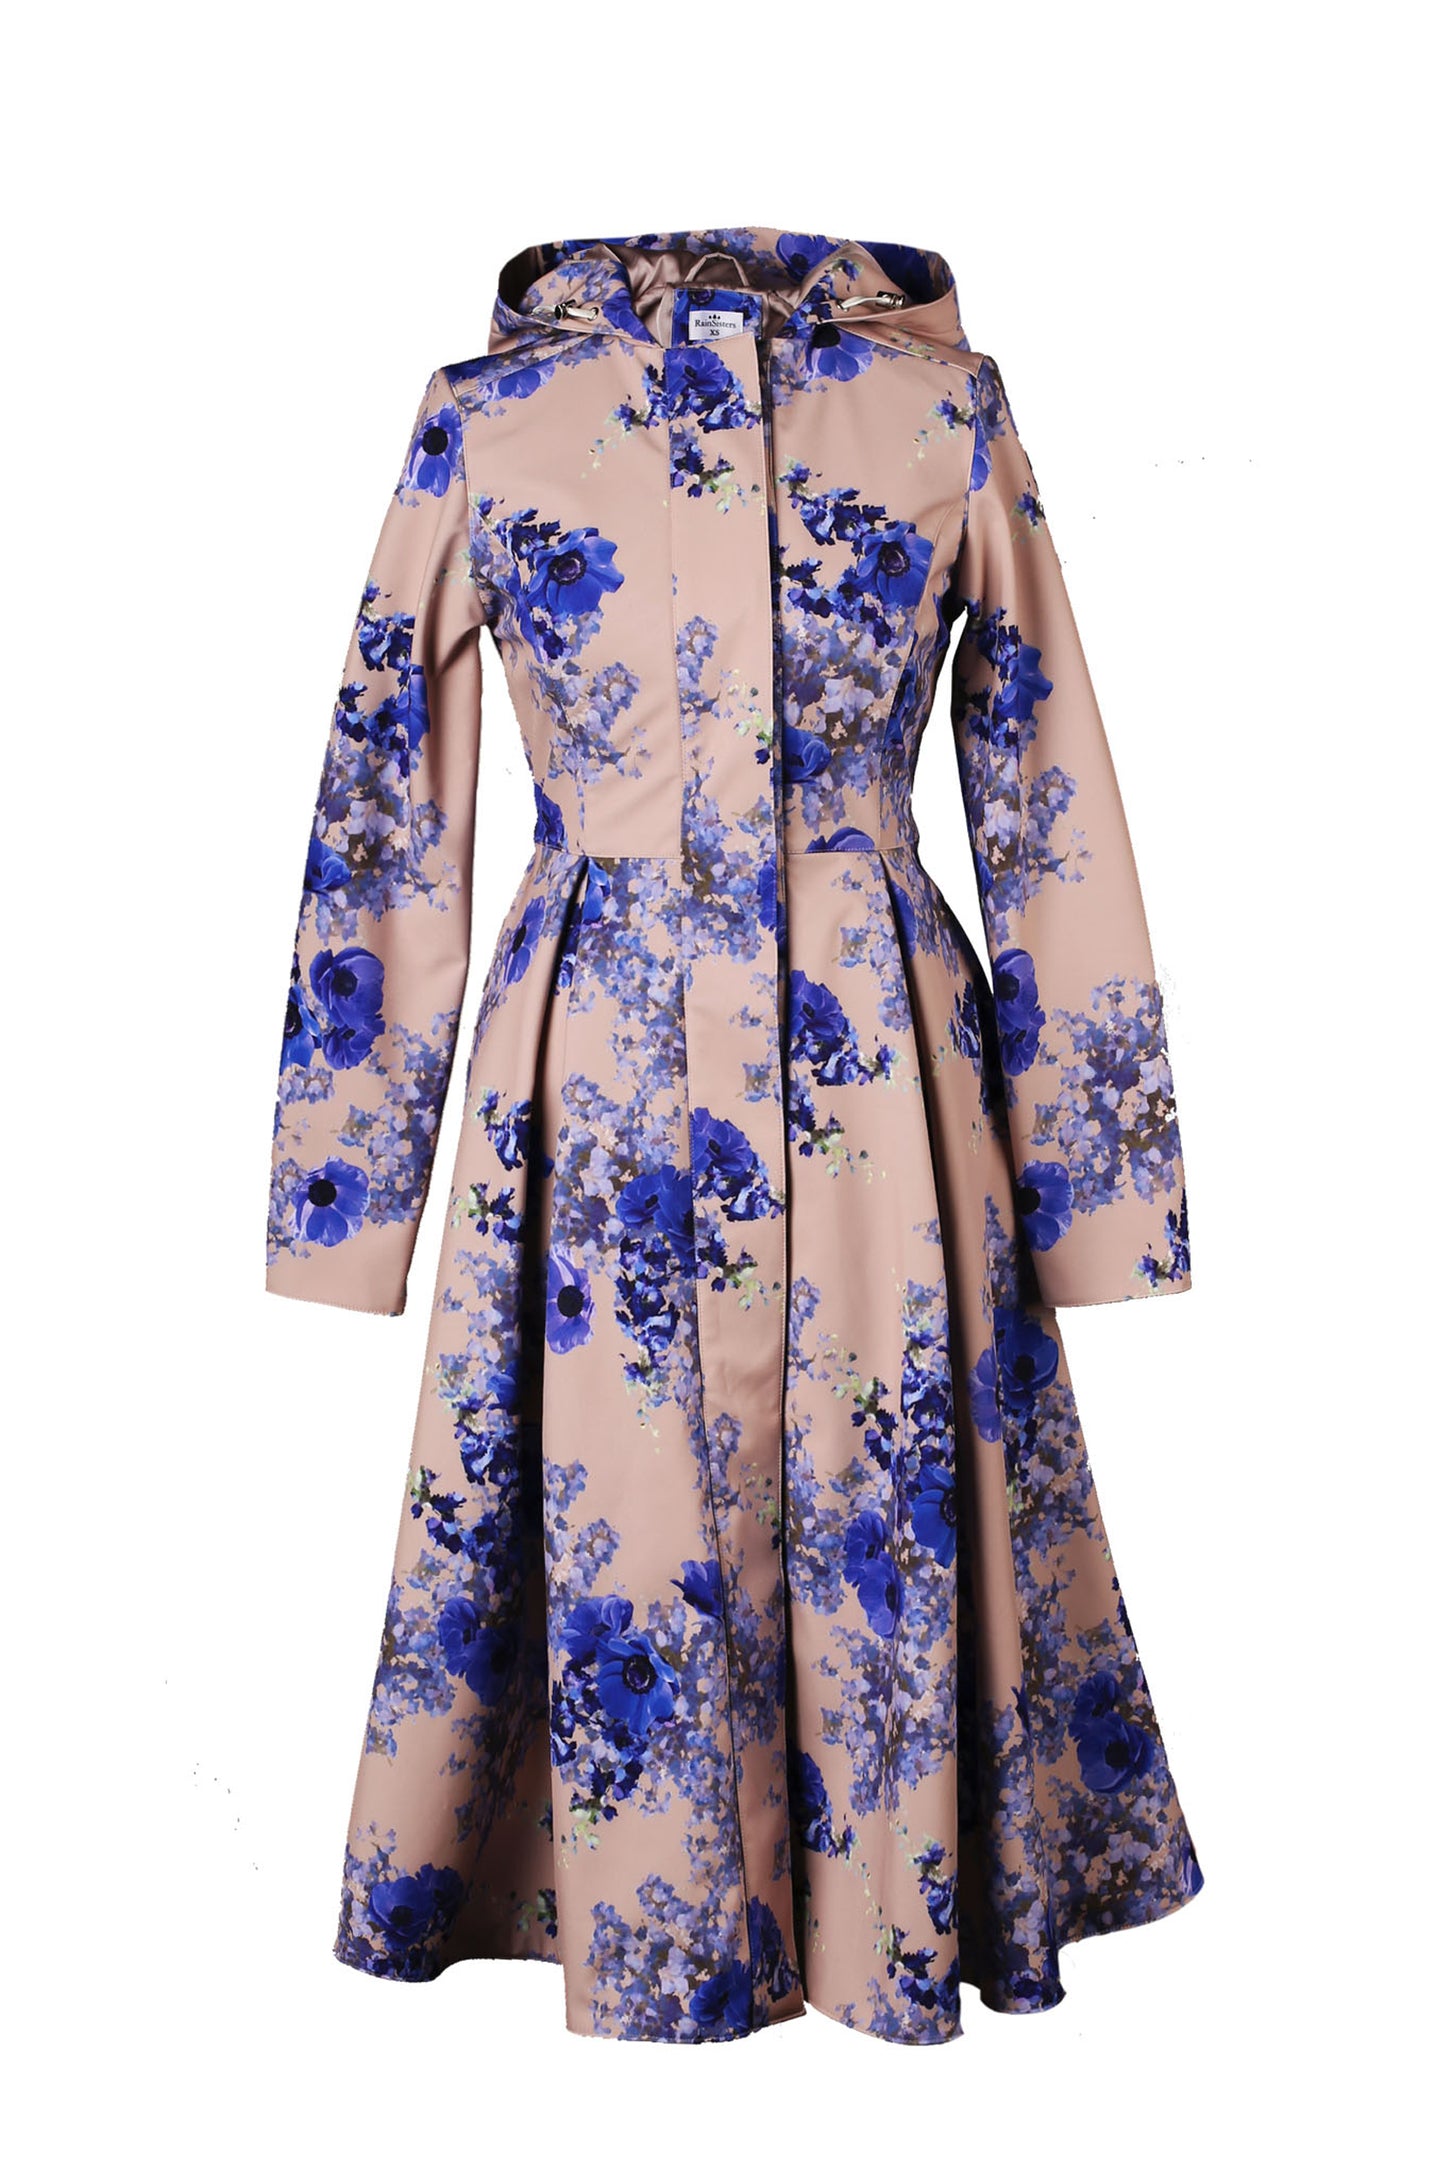  Long Hooded Waterproof Trench Coat with Blue Flower Print on Beige Background